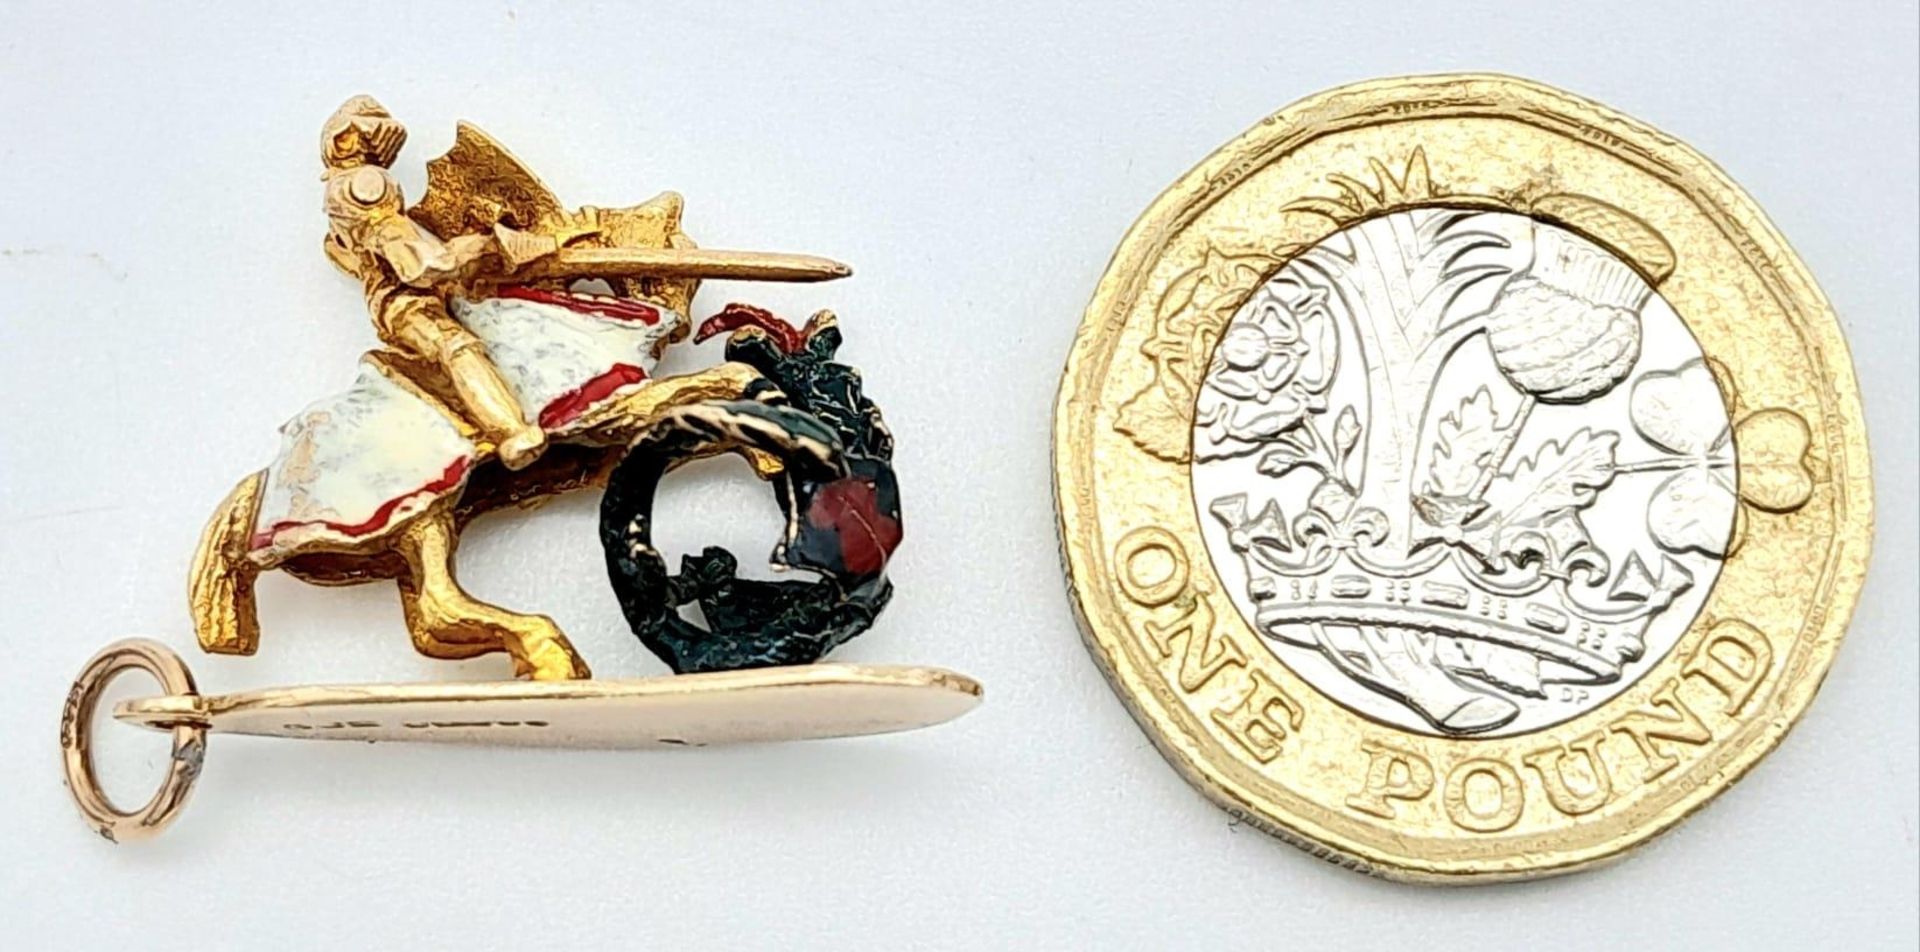 A 9K YELLOW GOLD ENAMELLED ST GEORGE & DRAGON CHARM - AMAZING DETAIL! 4.6G - Image 3 of 4